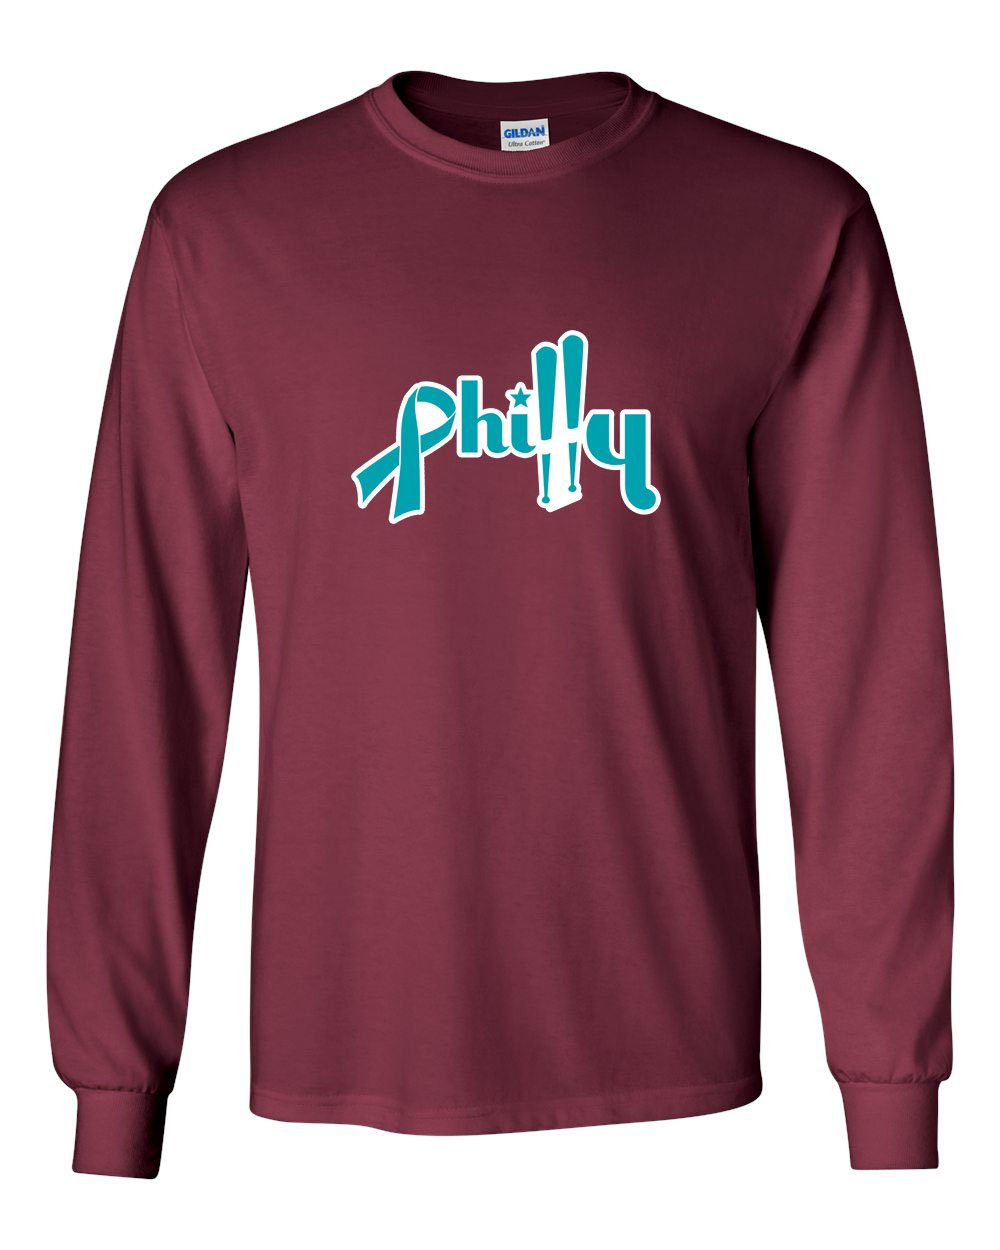 Ovarian Philly MENS Long Sleeve Heavy Cotton T-Shirt